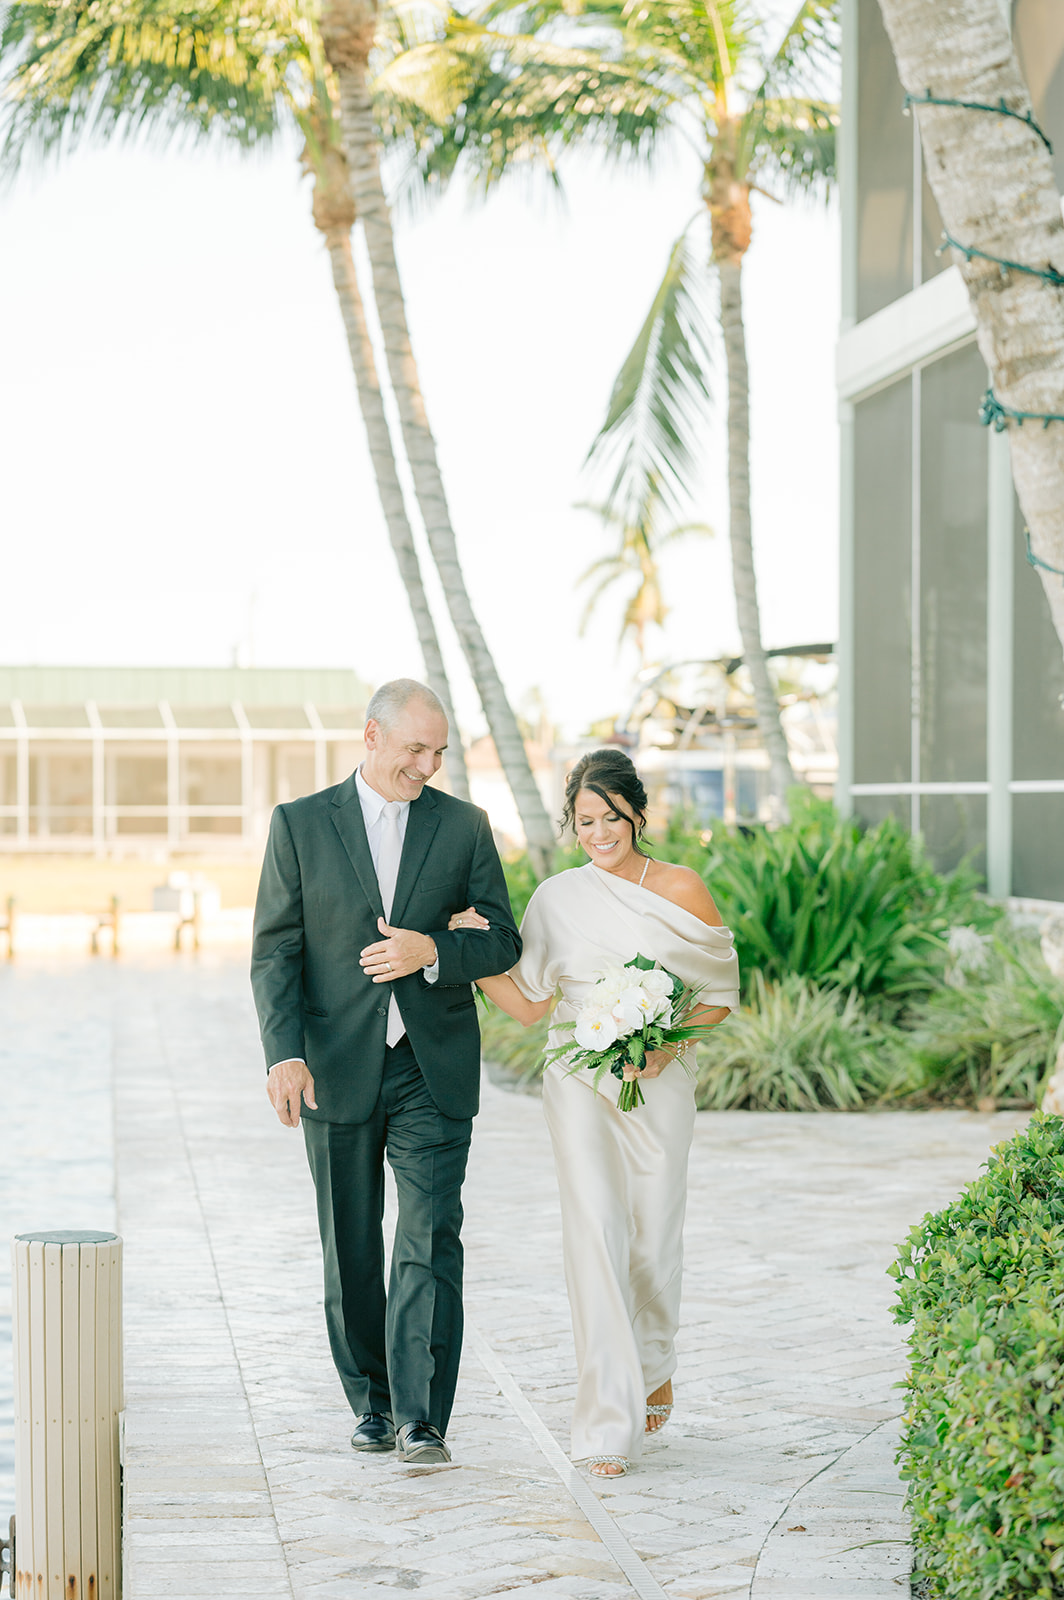 Professional Marco Island Wedding Photography Services - Expertise You Can Count On
